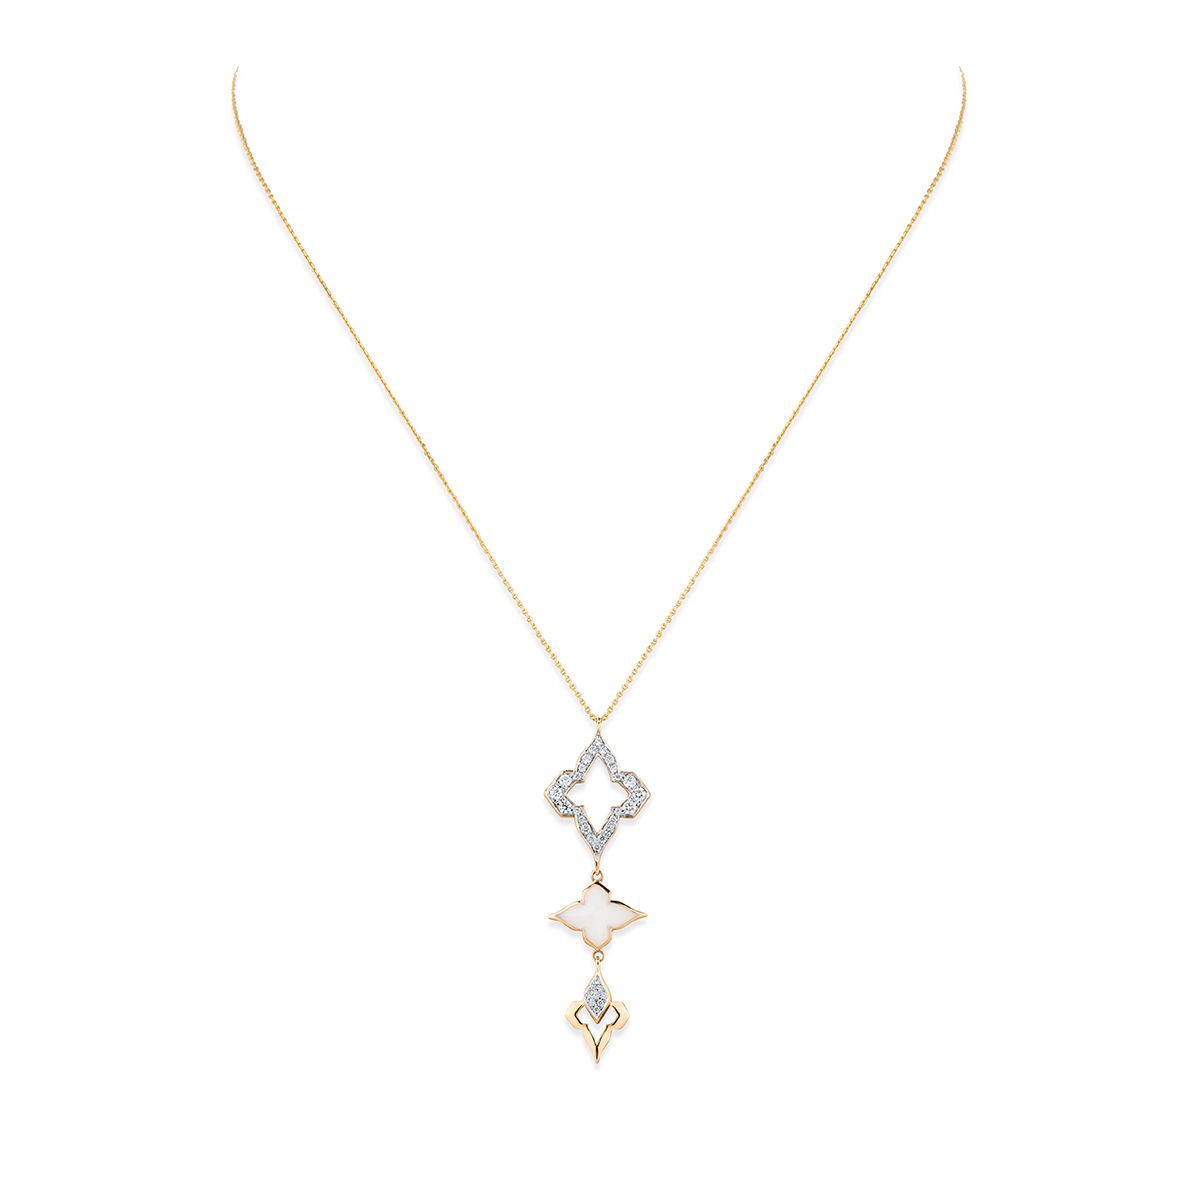 IDYLLE BLOSSOM Y PENDANT, 3 GOLDS AND DIAMONDS - Jewelry